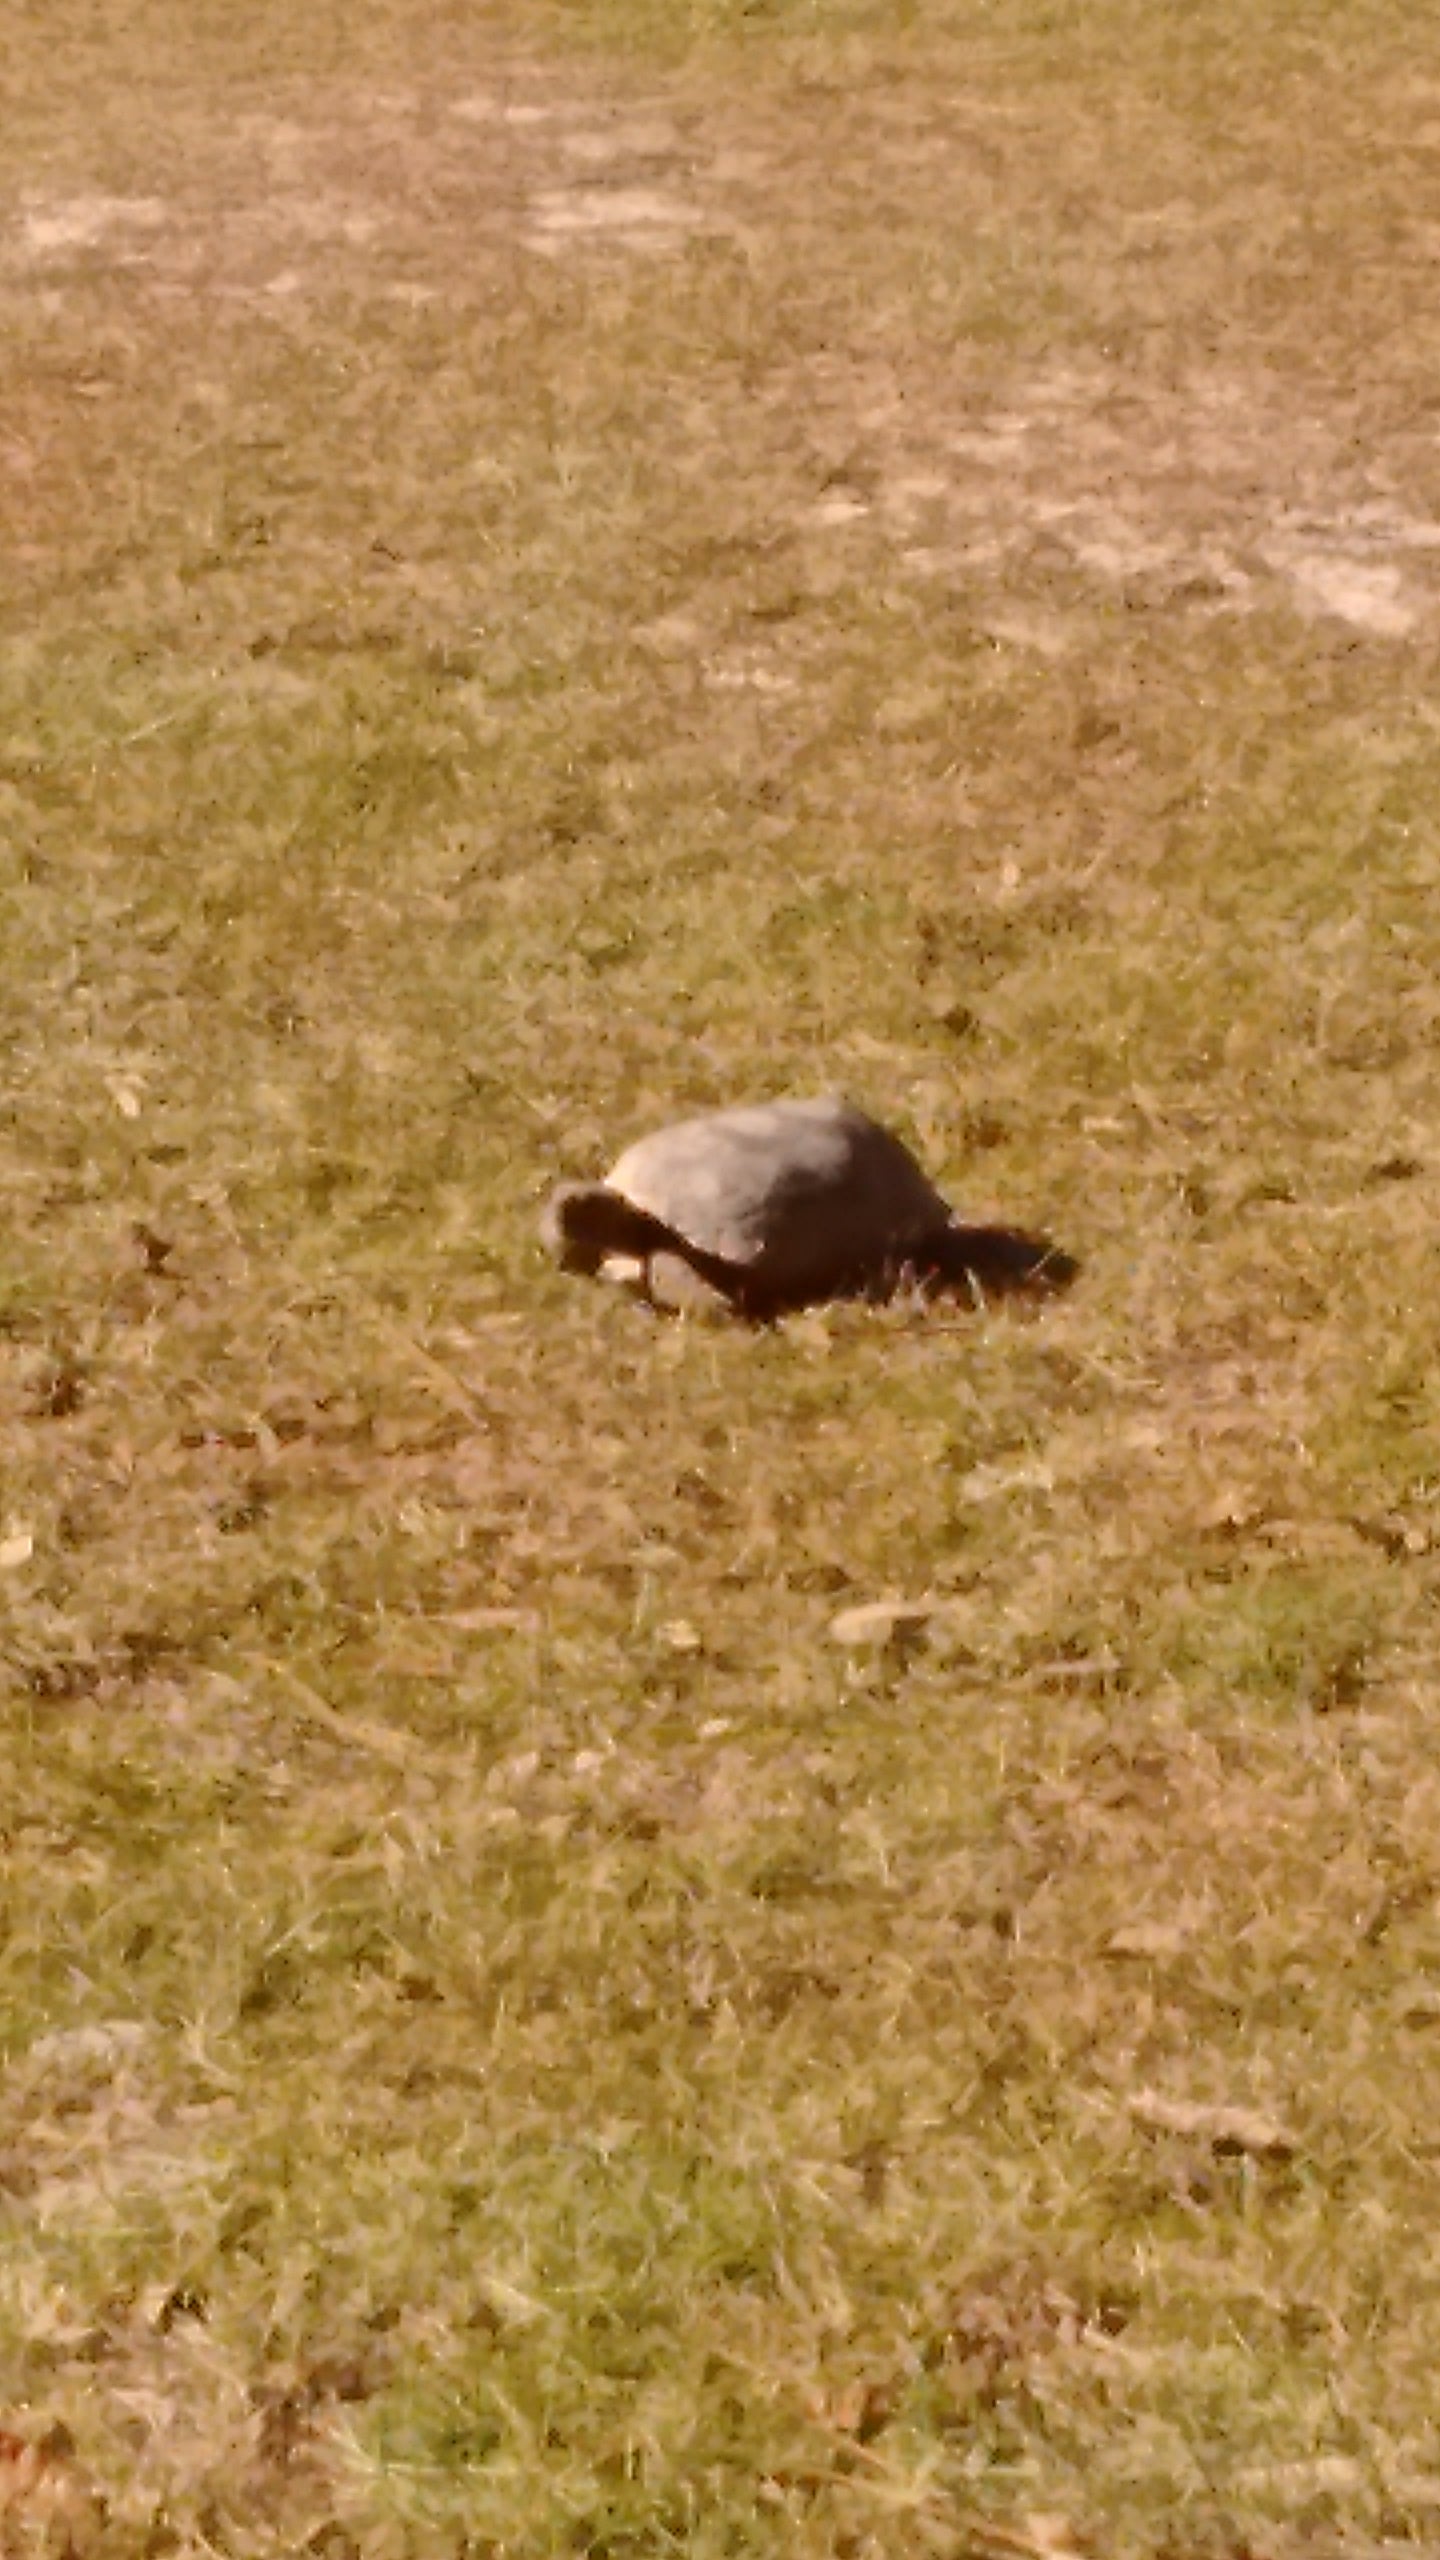 Tortoise in campground.